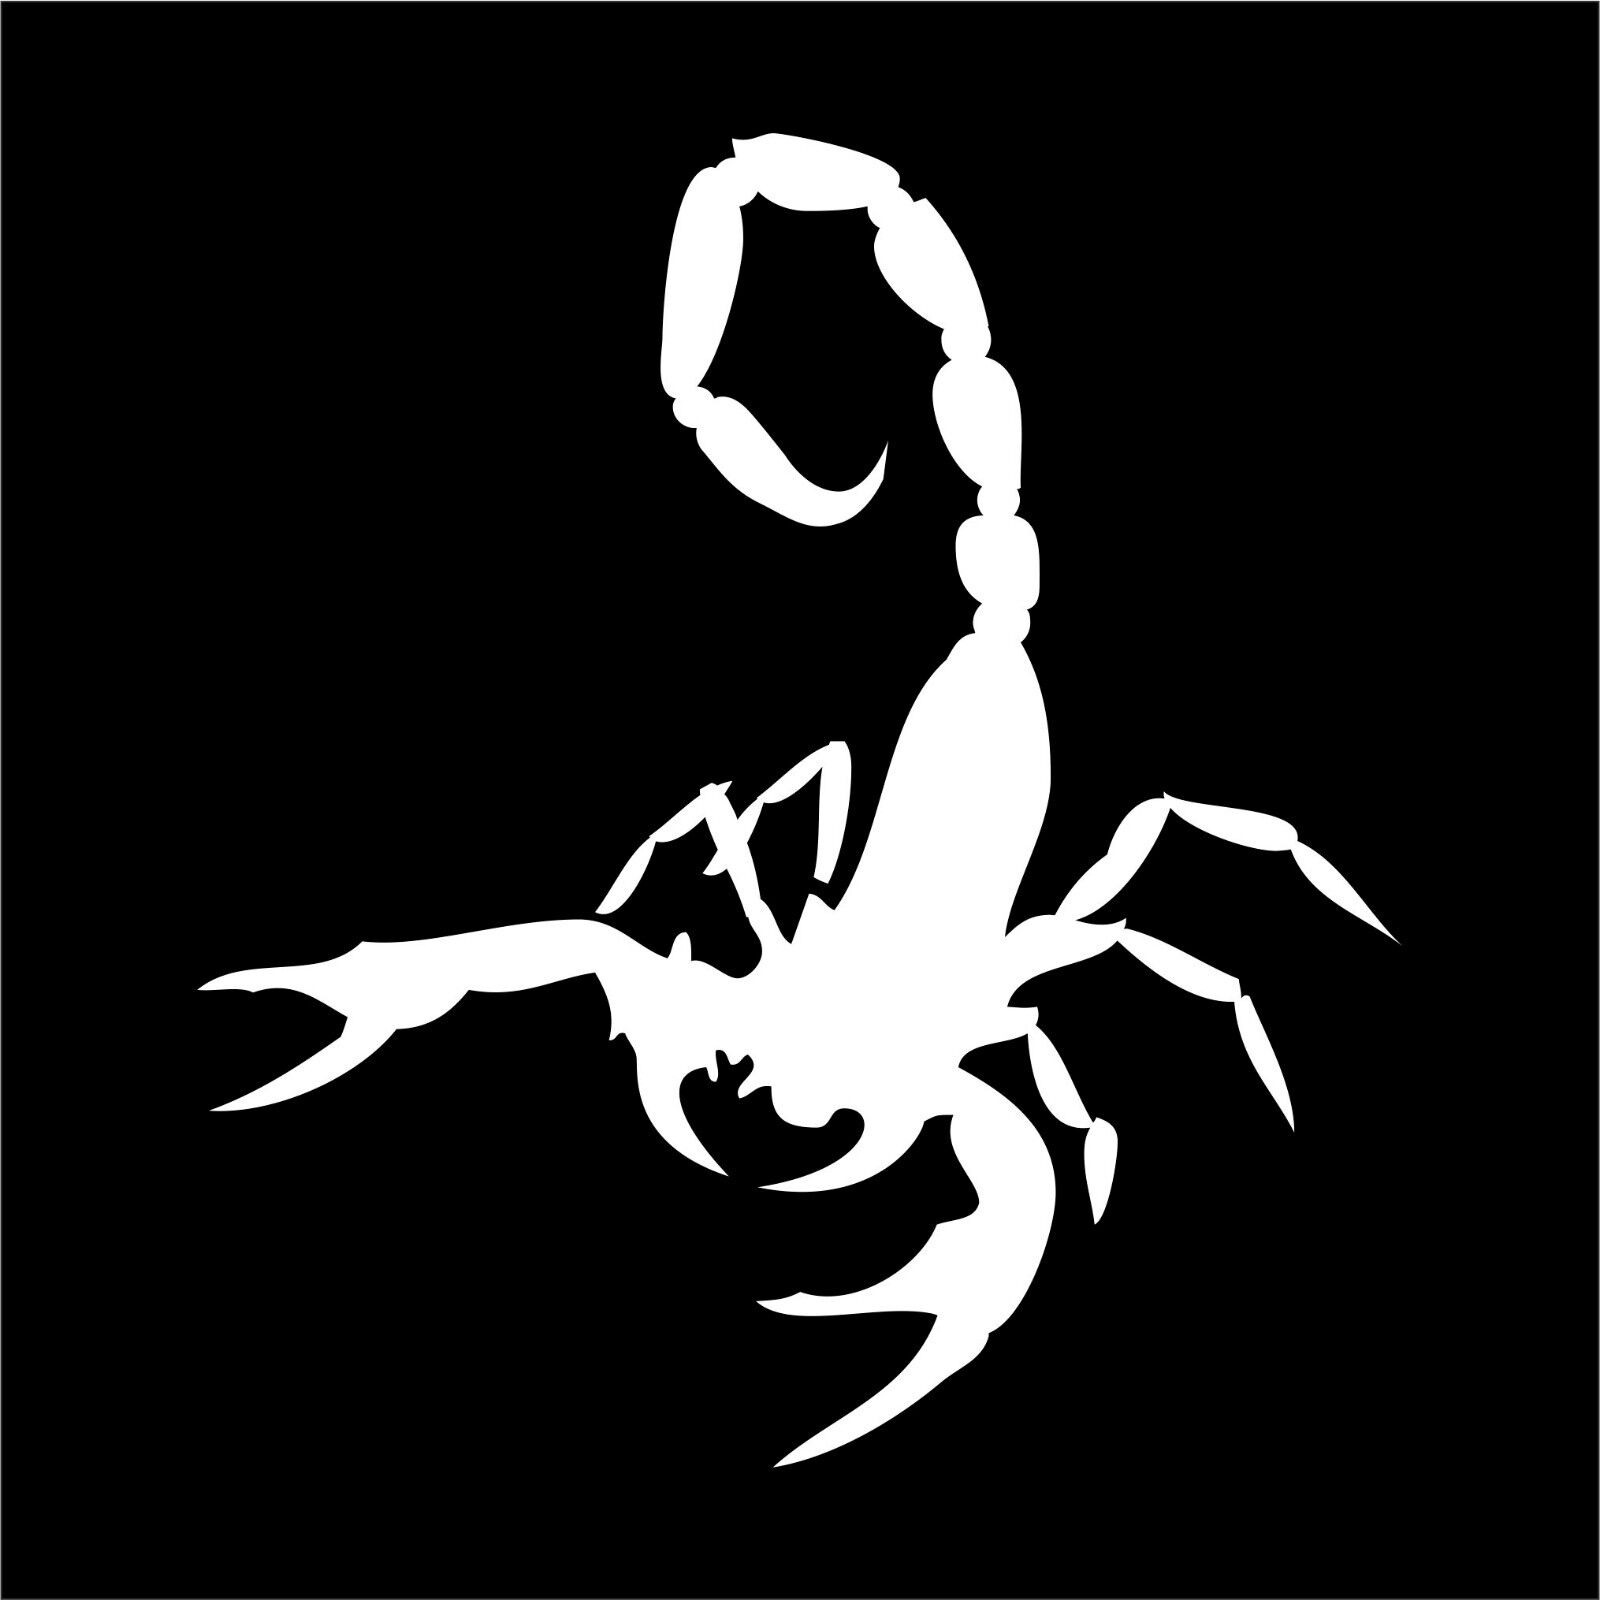 Scorpion Decal Sticker Car Decal Laptop Decal - Choice of Colors & Sizes 